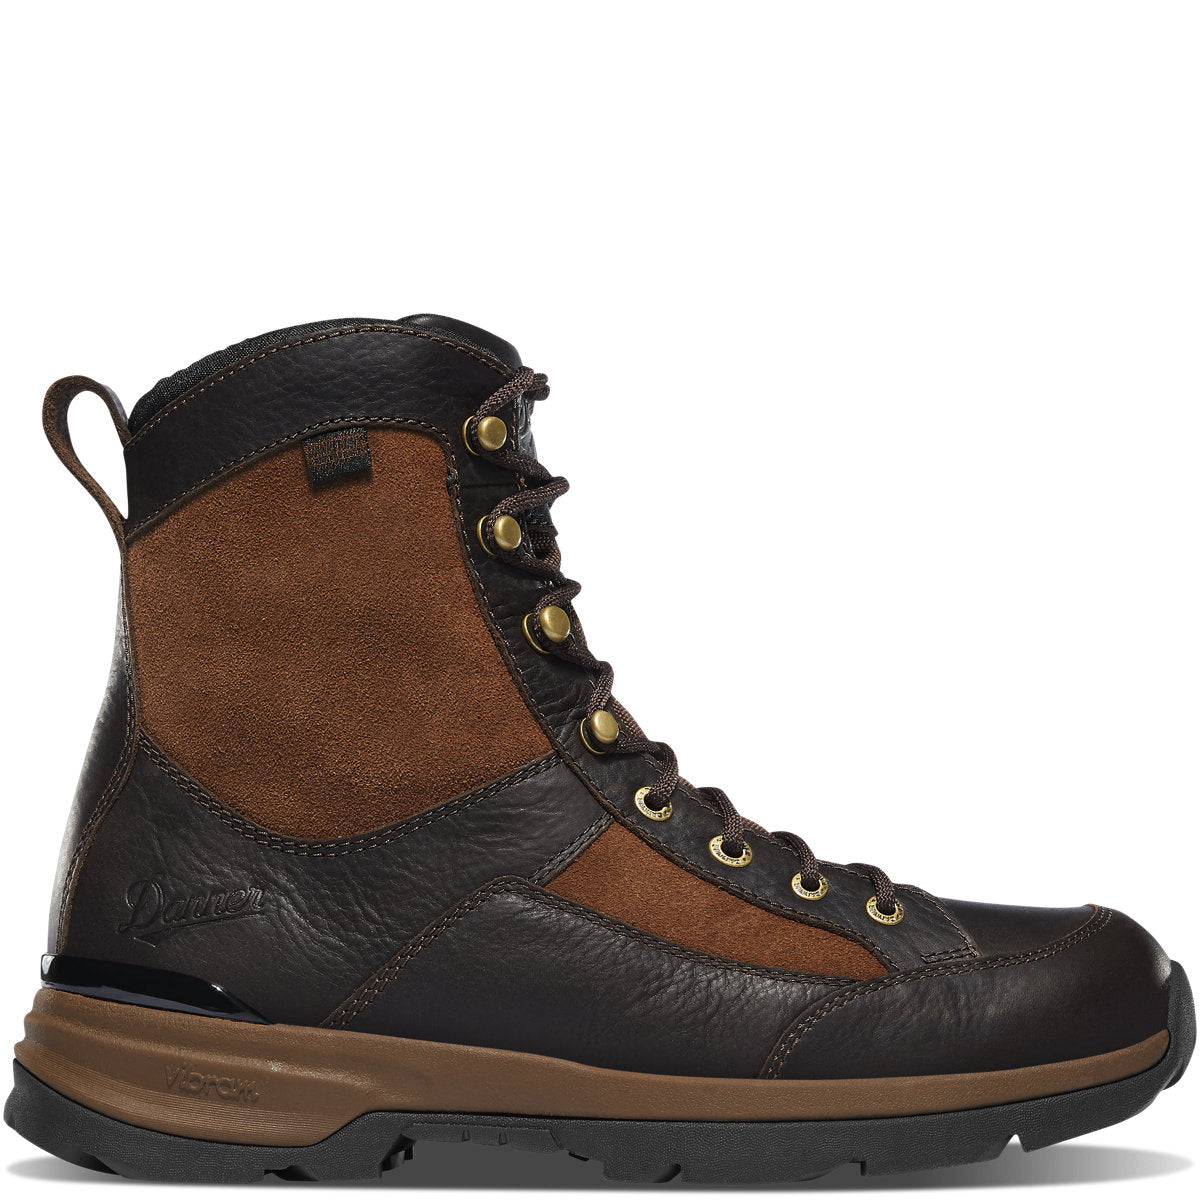 DANNER Recurve Brown Insulated 400G Boot